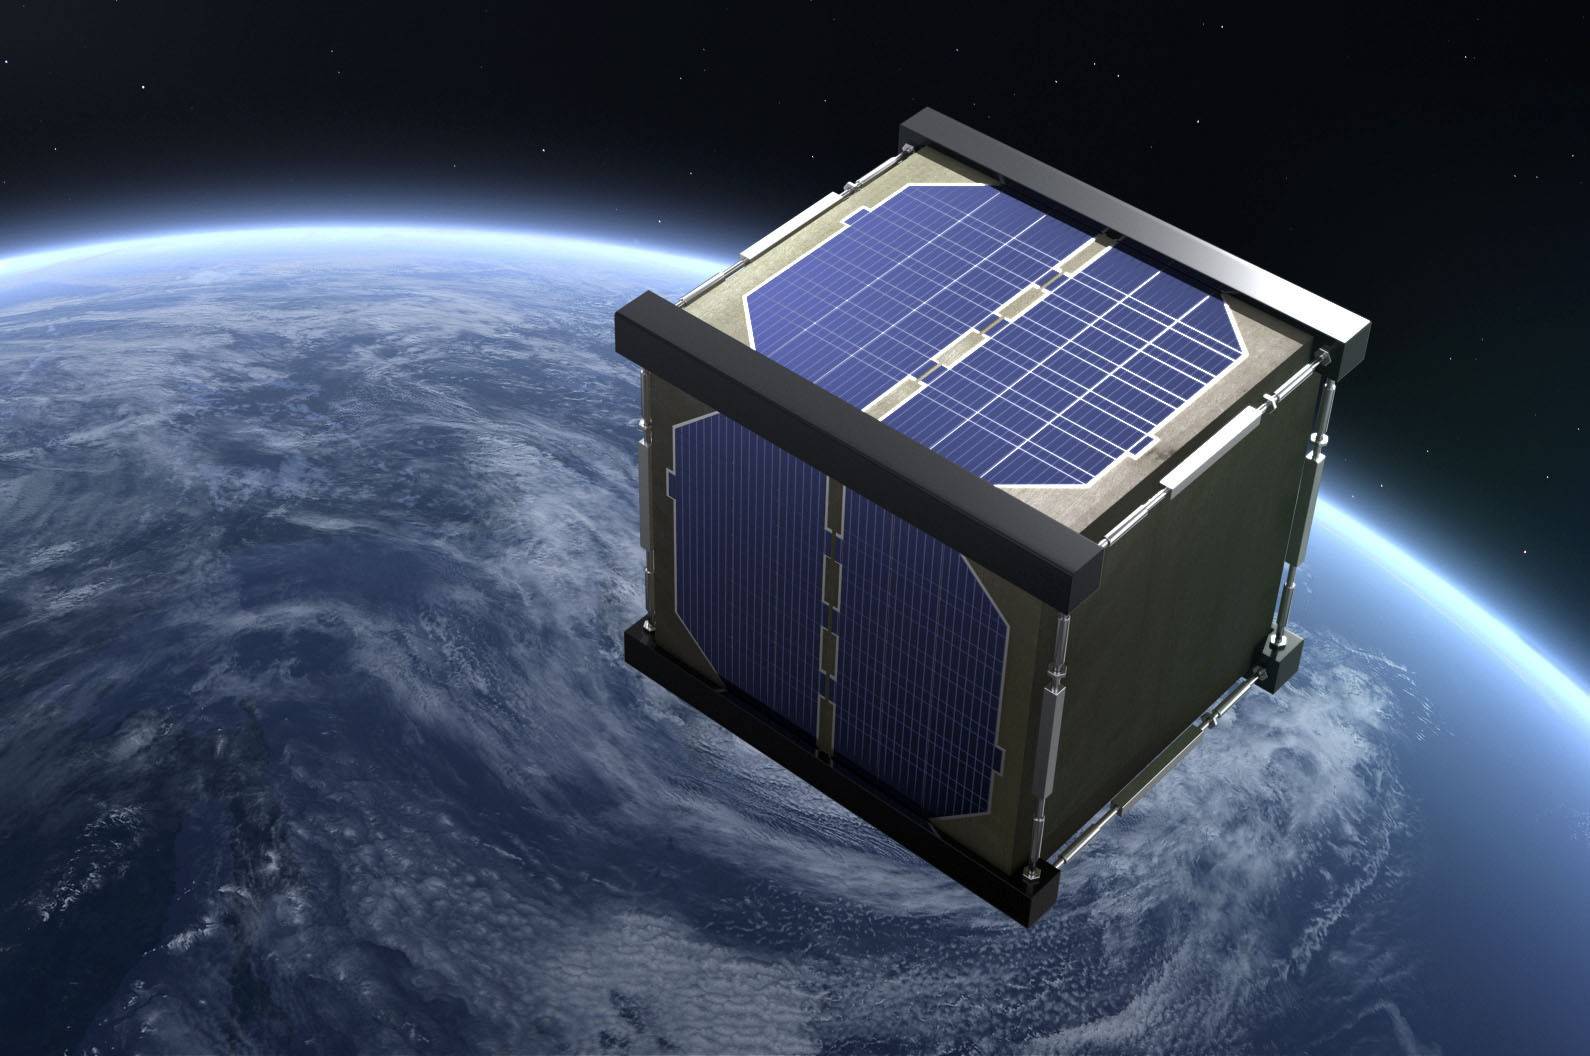 Kyoto University and Sumitomo Forestry Co. are hoping to launch a satellite made partially of wood in 2023. | COURTESY OF KYOTO UNIVERSITY / VIA KYODO